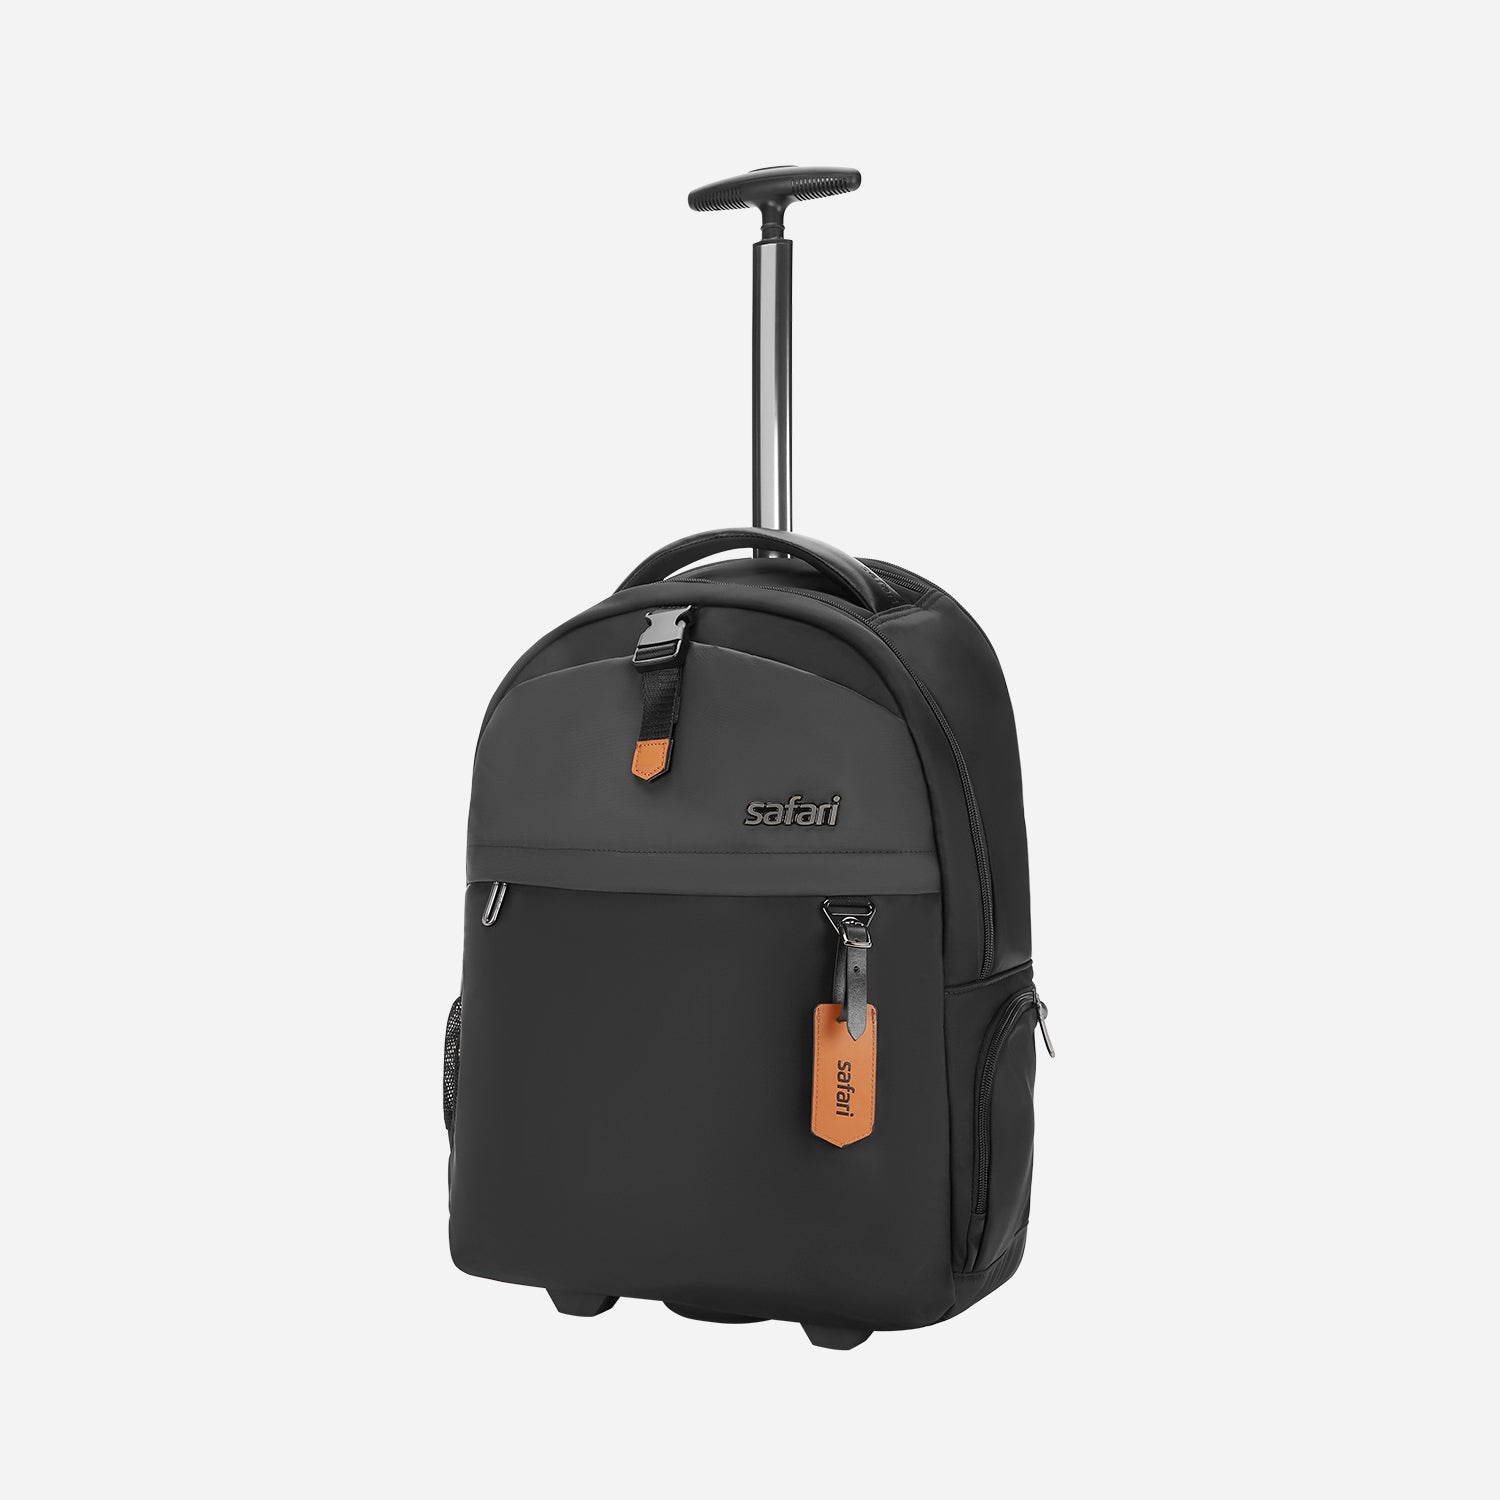 Trooper Travel Backpack with Trolley + Wheel, Detailed Interior, Name Tag and Premium Nylon Fabric - Black